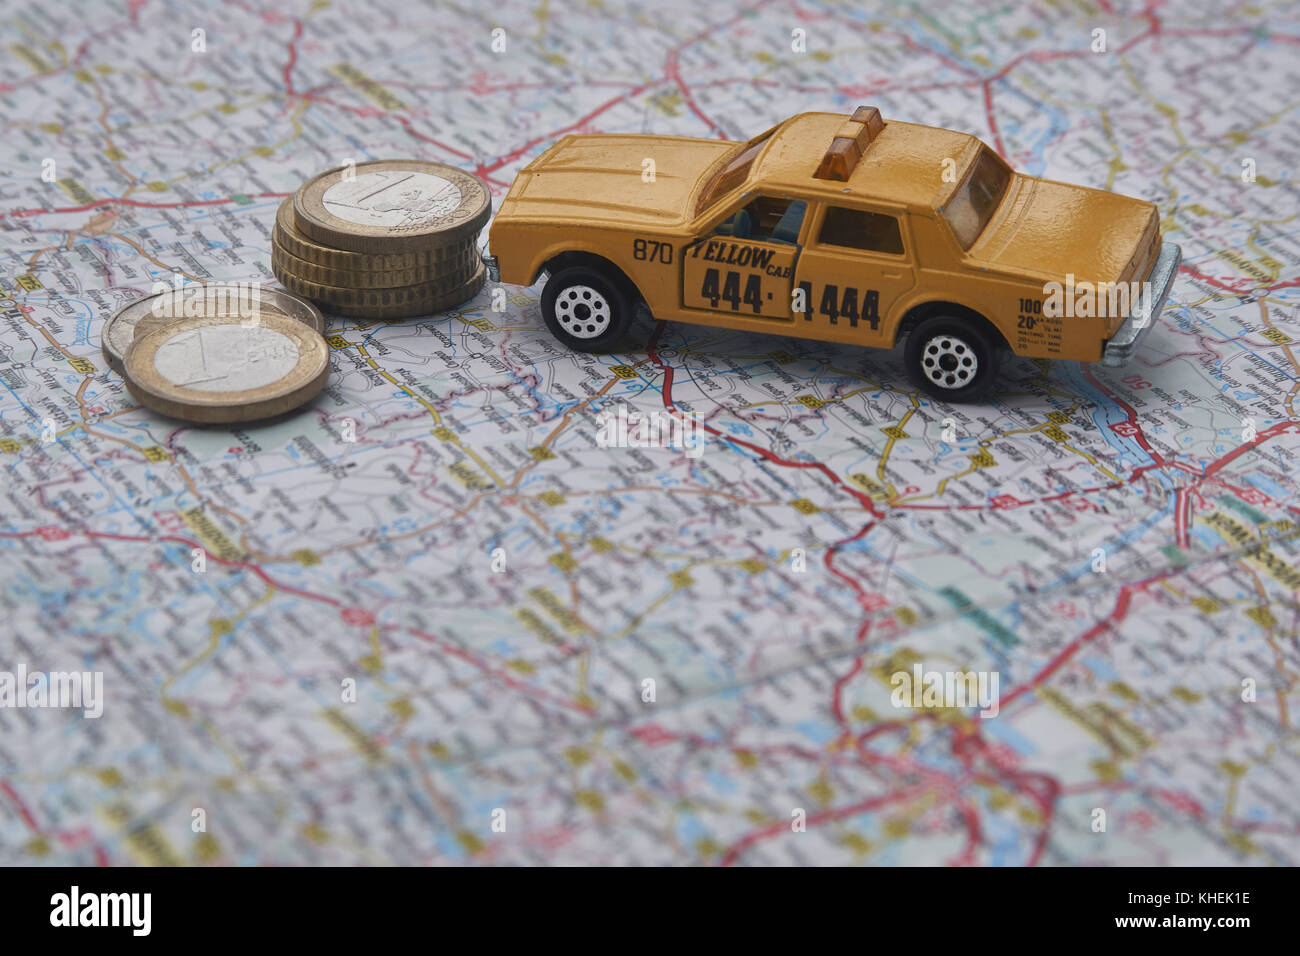 A toy taxi next to some euro coins on a map Stock Photo